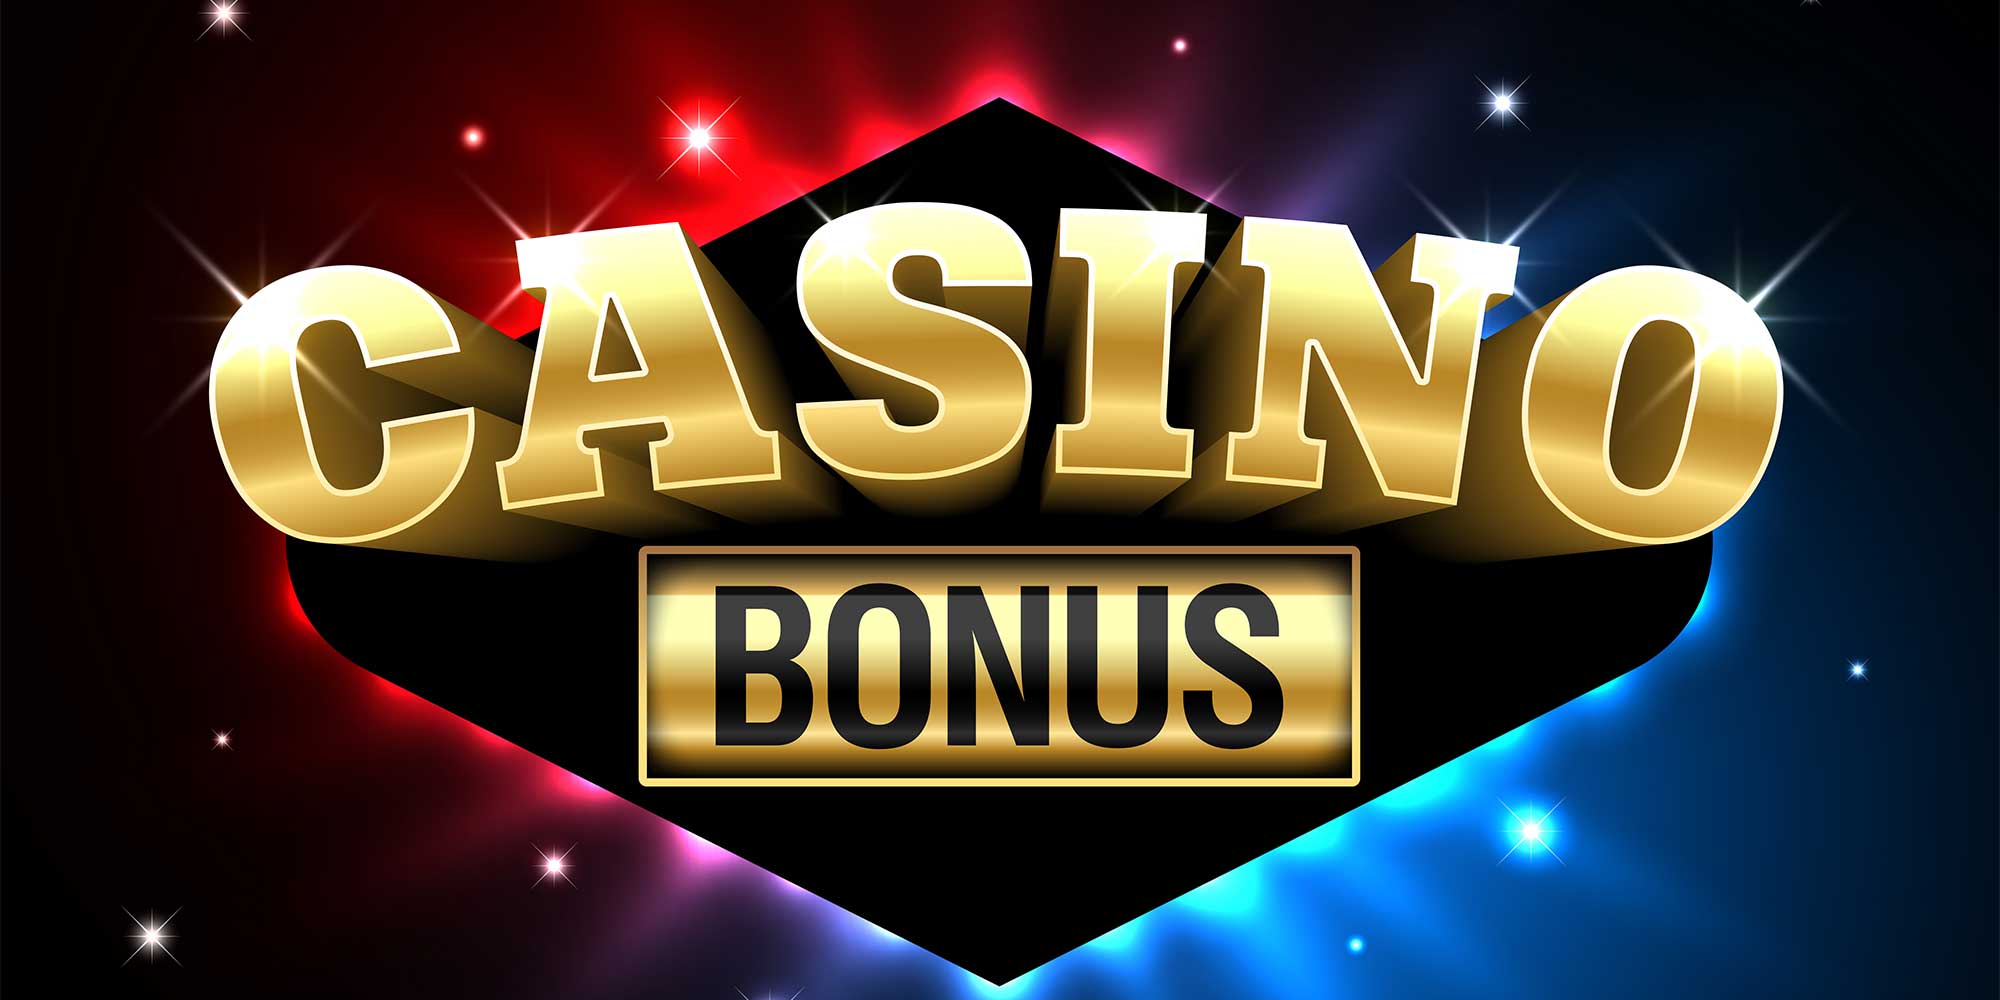 bons casino review